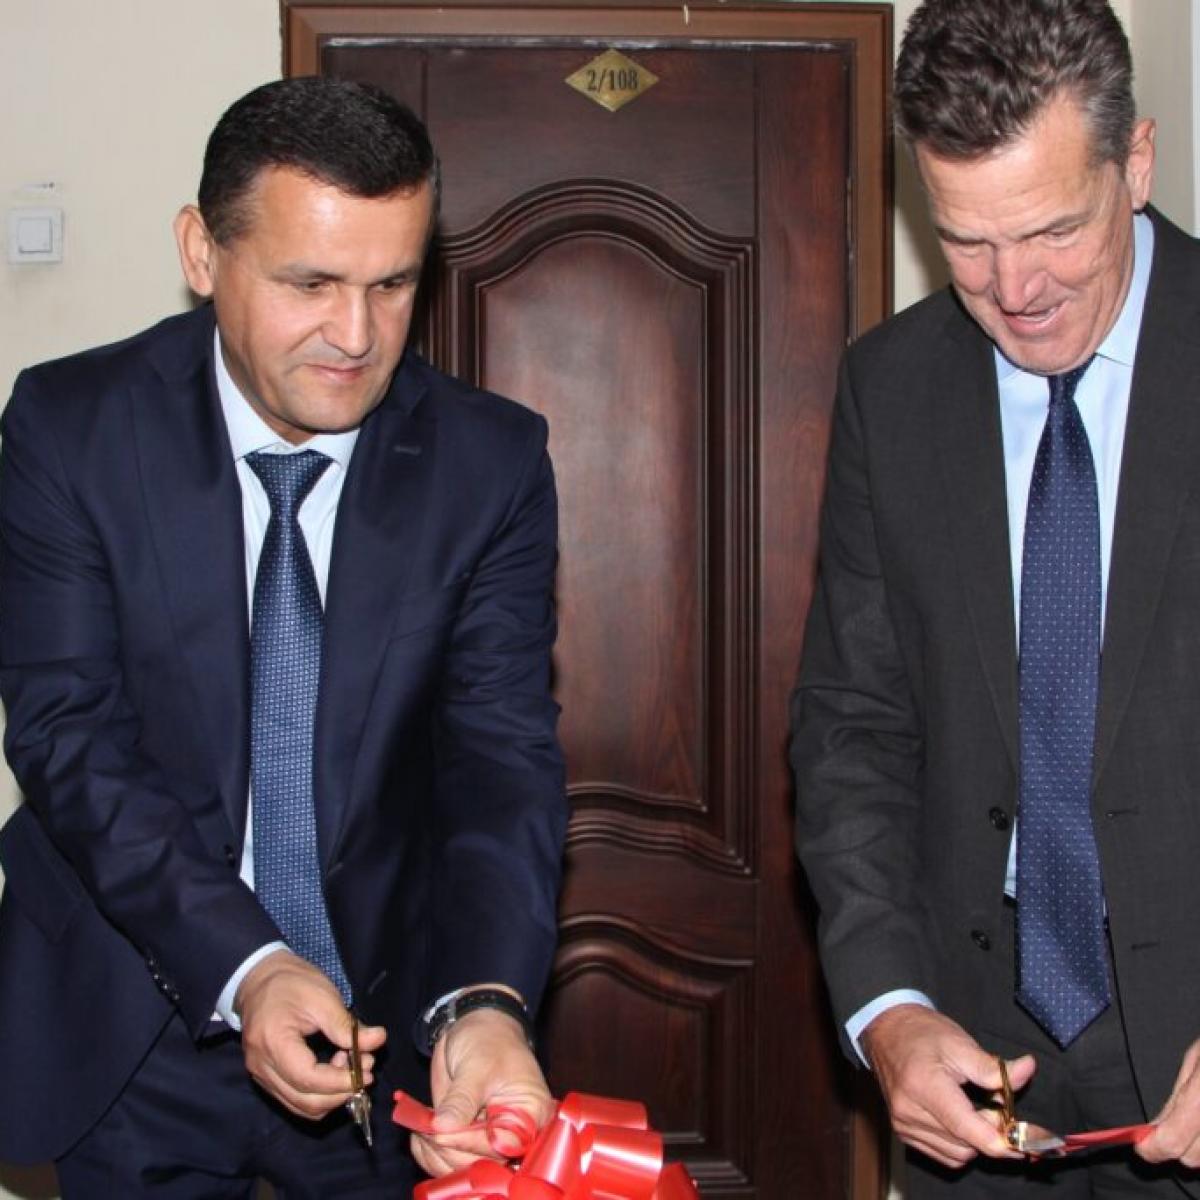 USAID Opens a Resource Center for Safe Oxygen Use at the Tajik Technical University